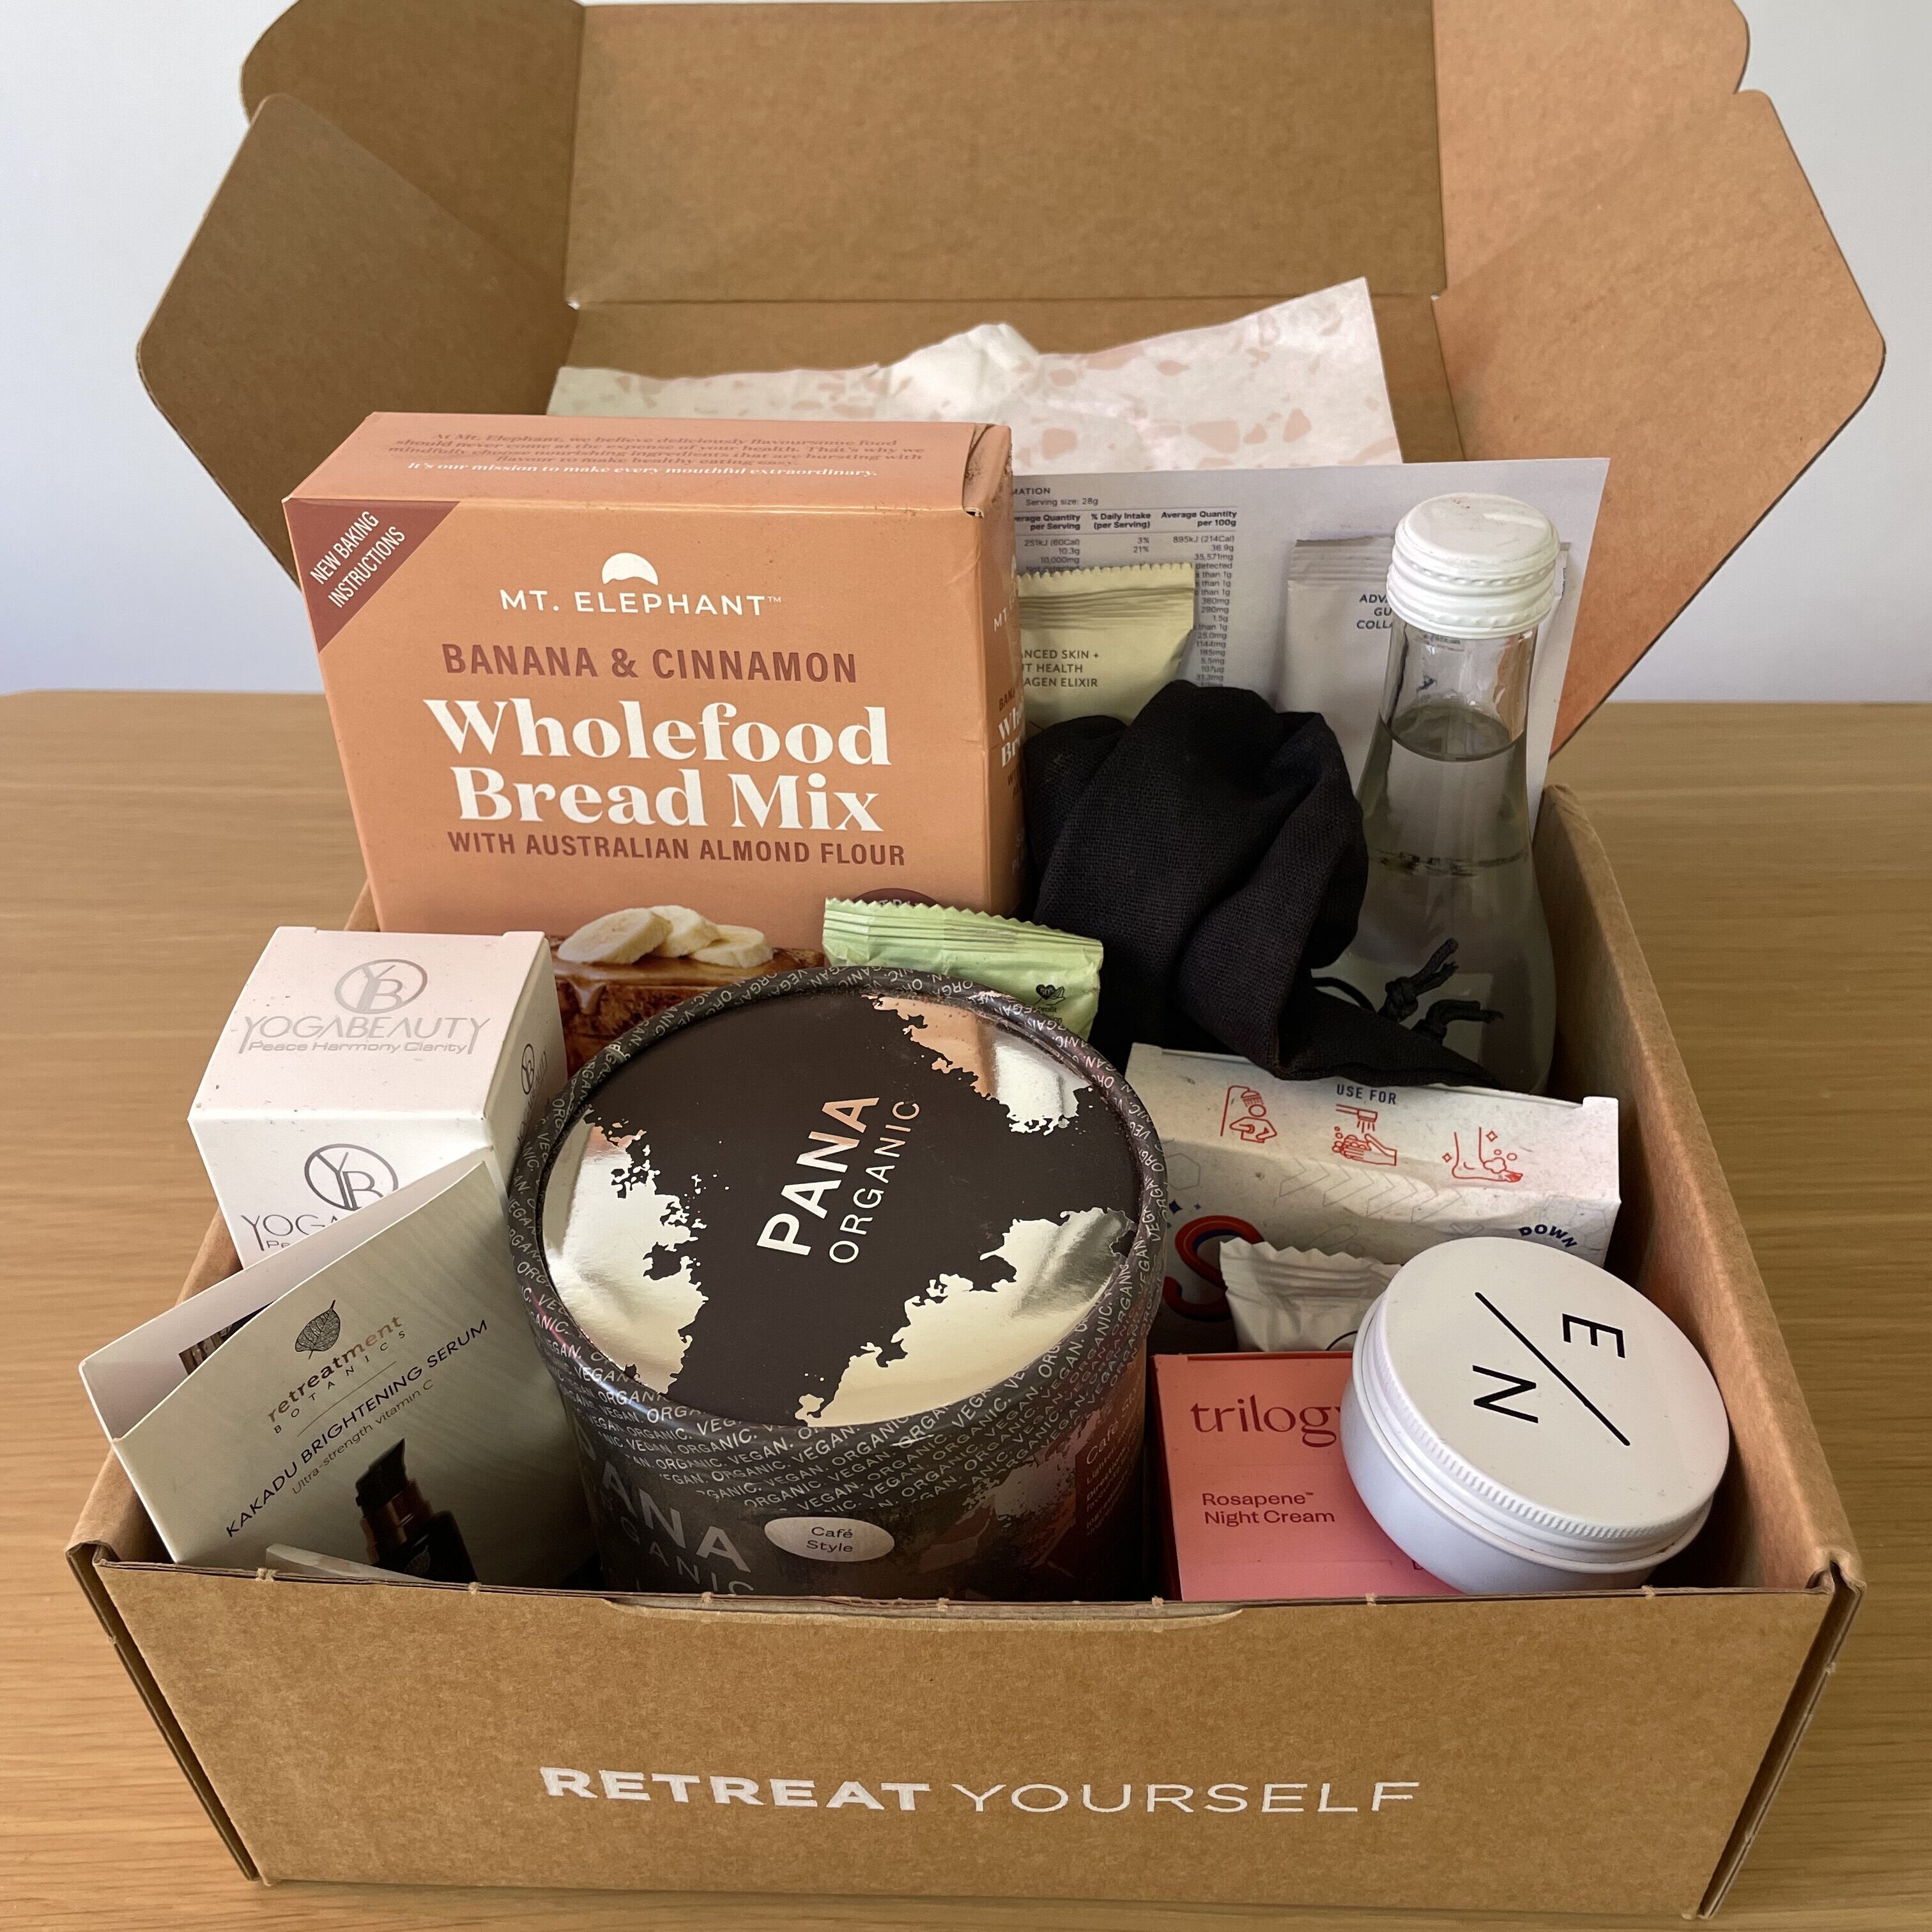 Retreat Yourself Limited Edition “Refresh + Renew” Mystery Box